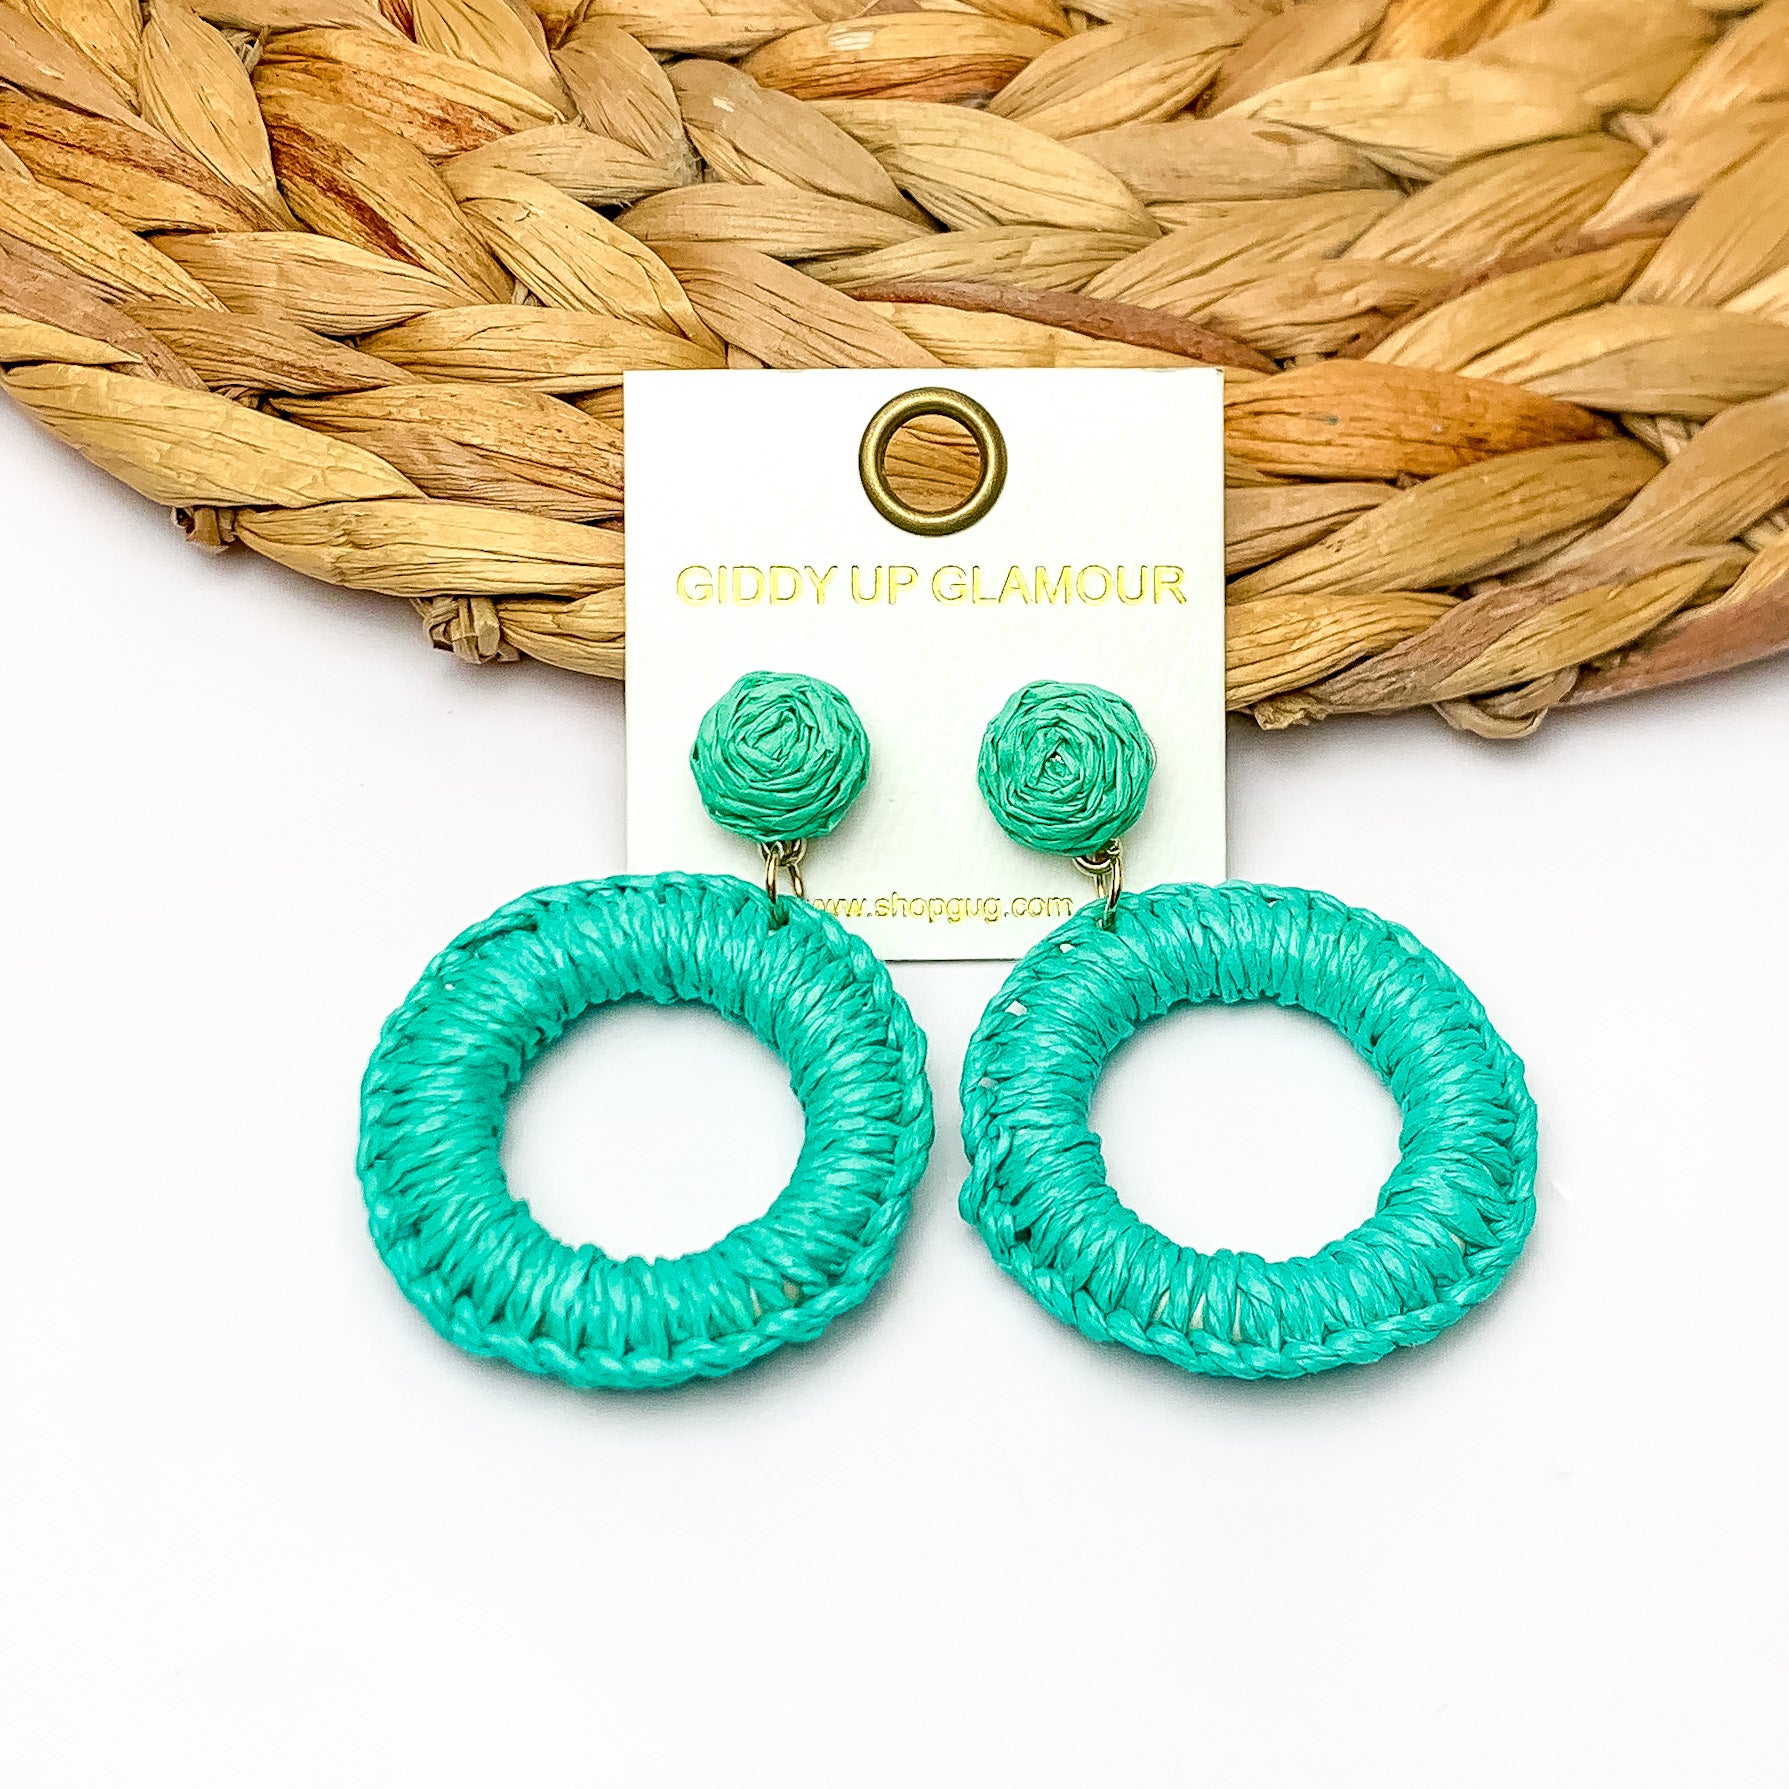 Beachside Café Raffia Wrapped Circle Earrings in Turquoise Green. Pictured on a white background with the top of the earrings laying on a brown circle decorative piece.